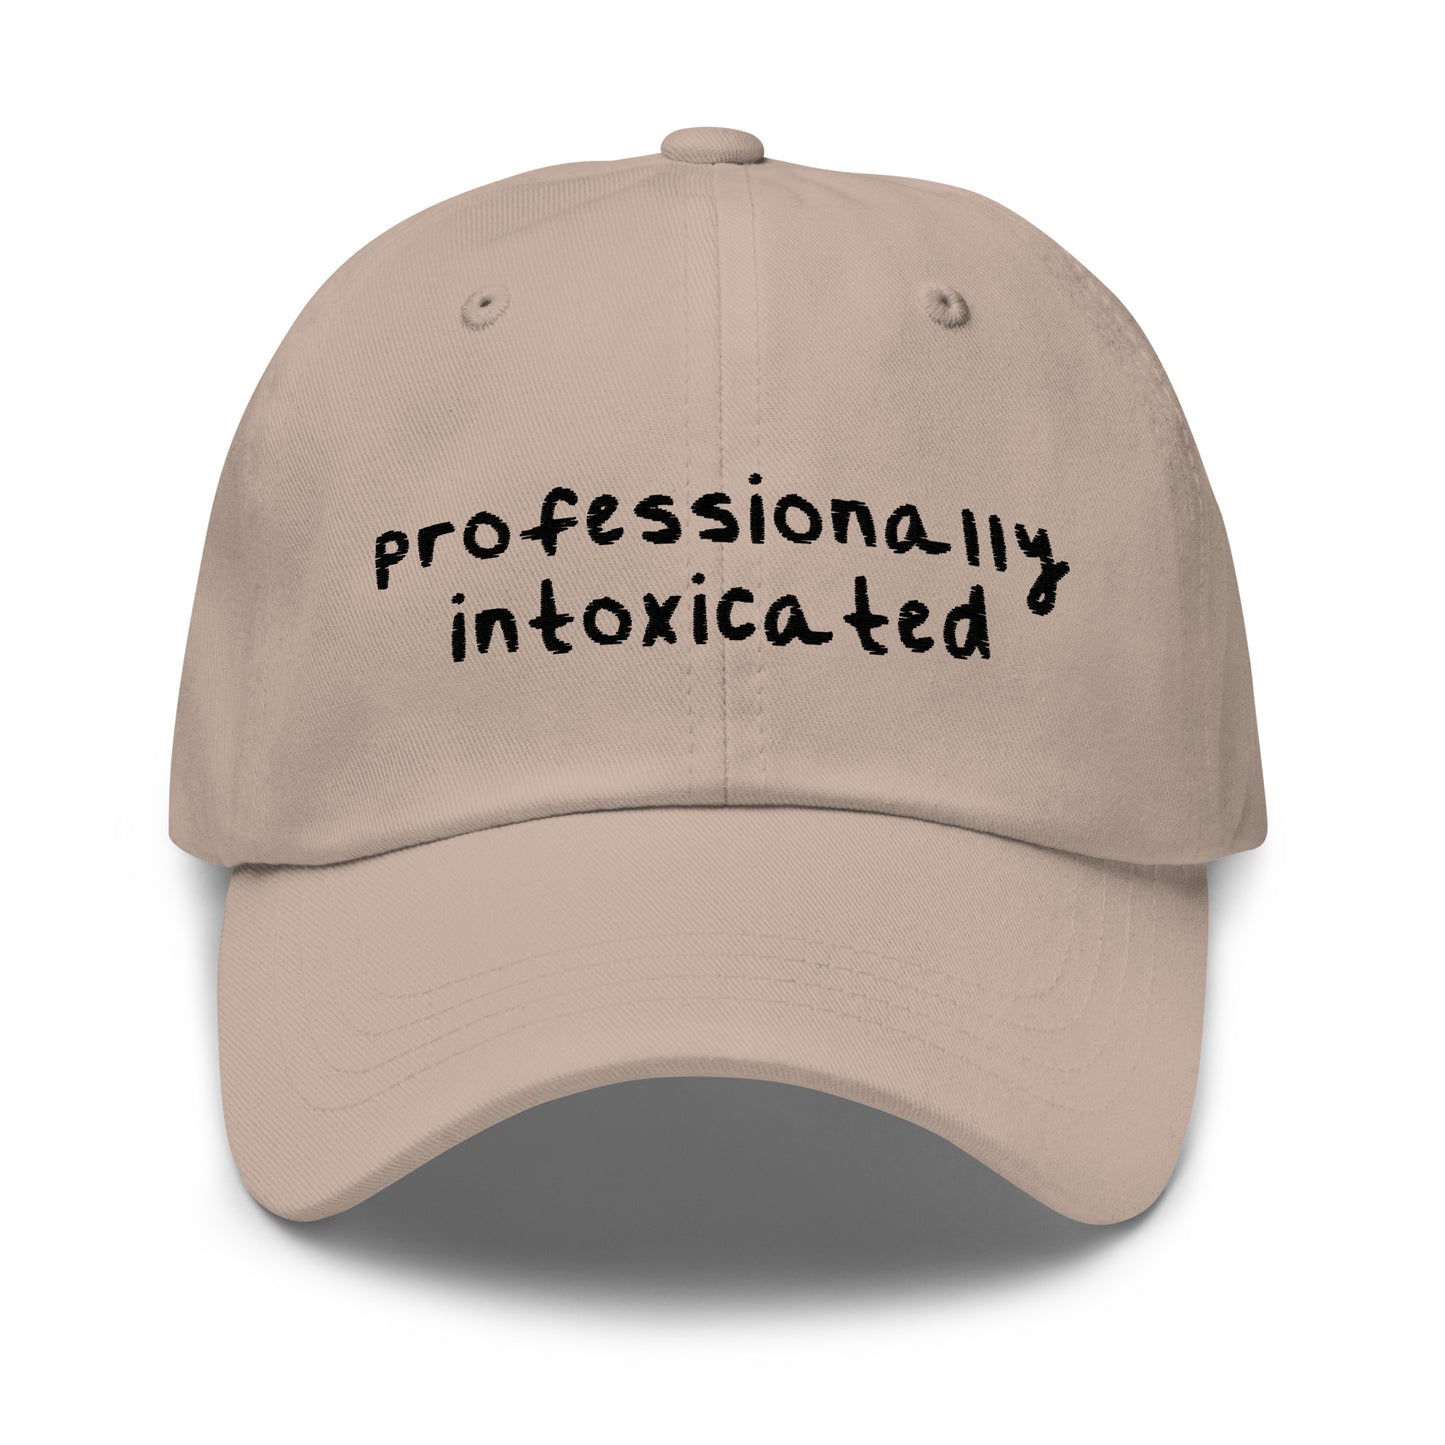 Professionally Intoxicated (Embroidered) hat